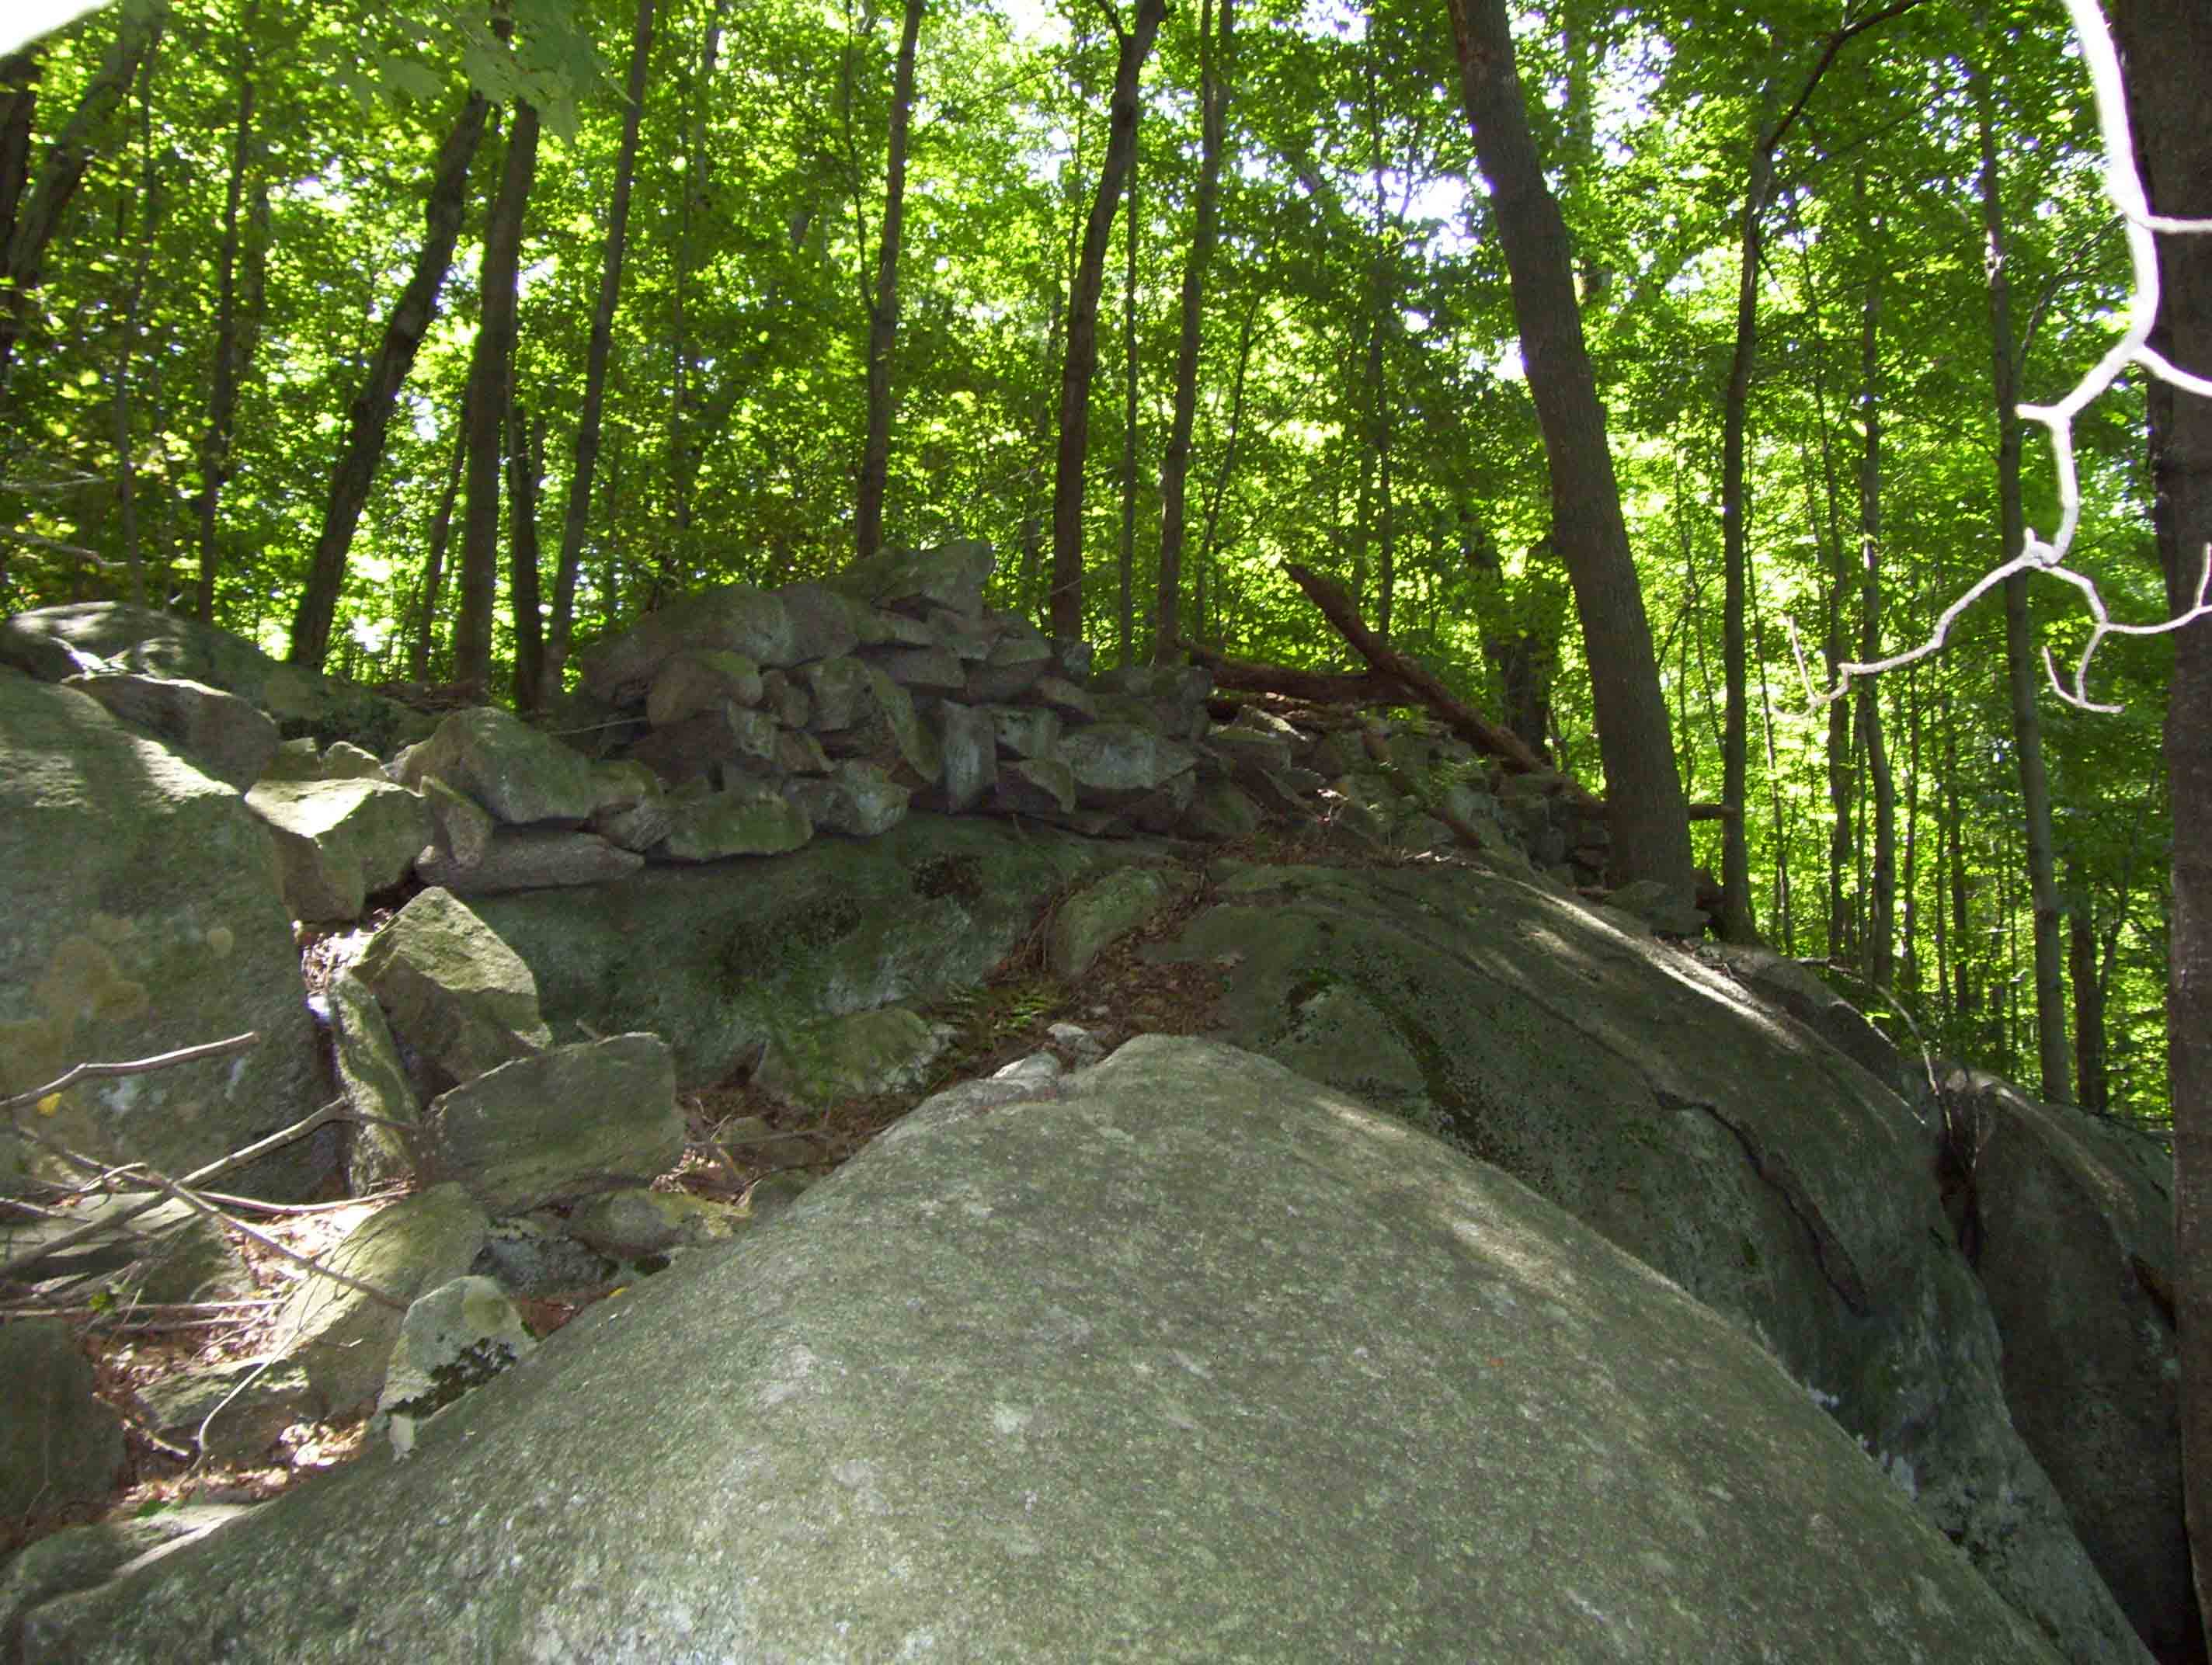 Old stone fence at top of rock. In the old days when this was pasture land, this hopefully kept stock from falling over the sheer rock face. Taken at approx. mm 6.3   Courtesy dlcul@conncoll.edu